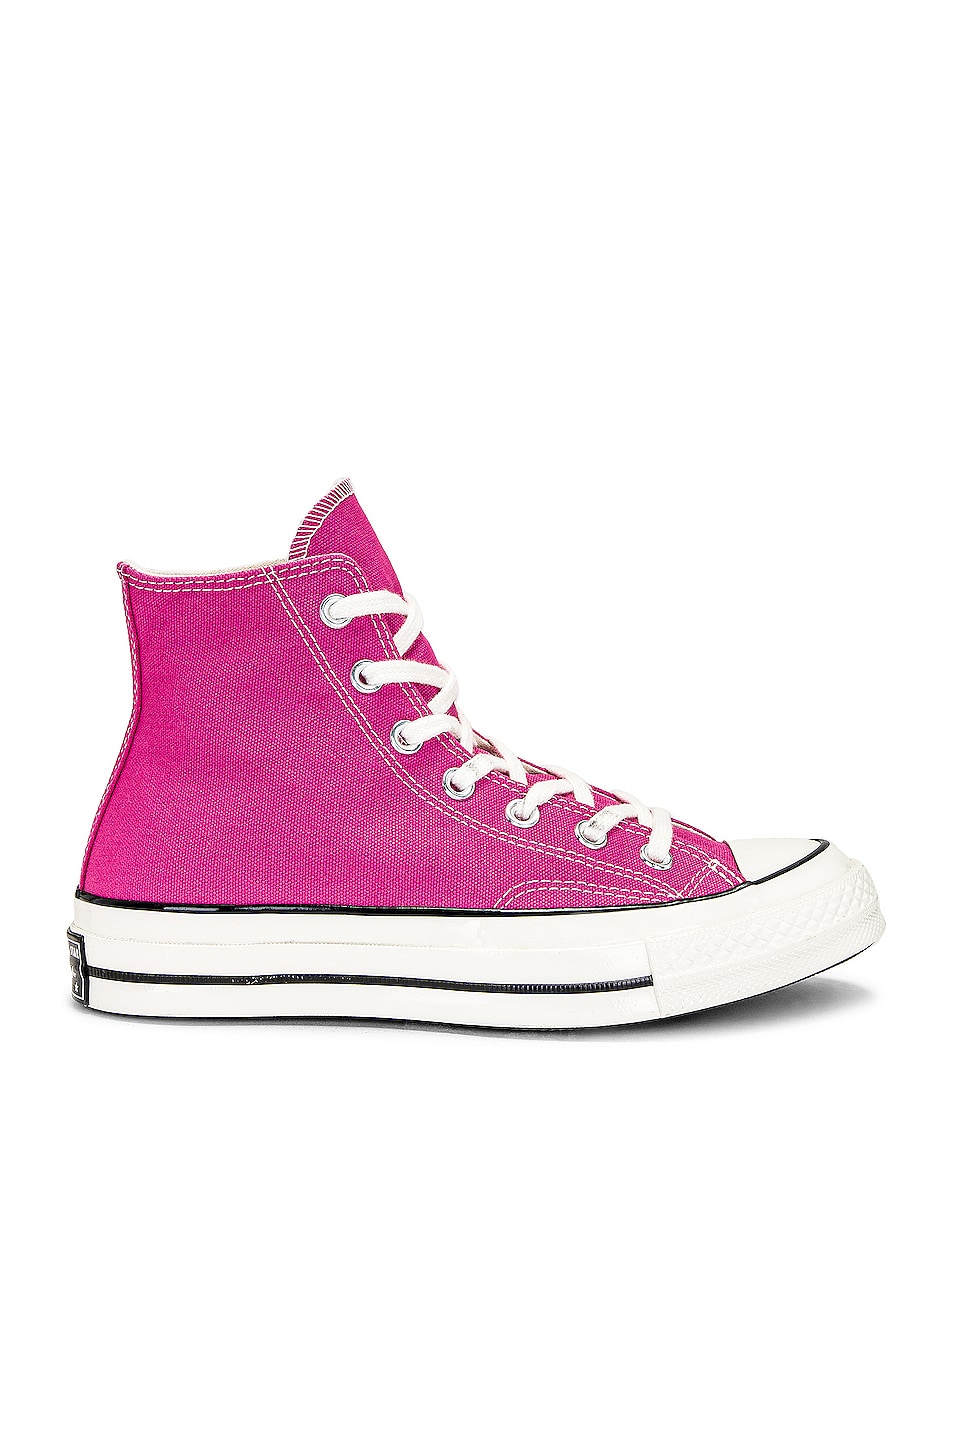 Image 1 of Converse Chuck 70 Fall Tone in Lucky Pink, Egret, & Black